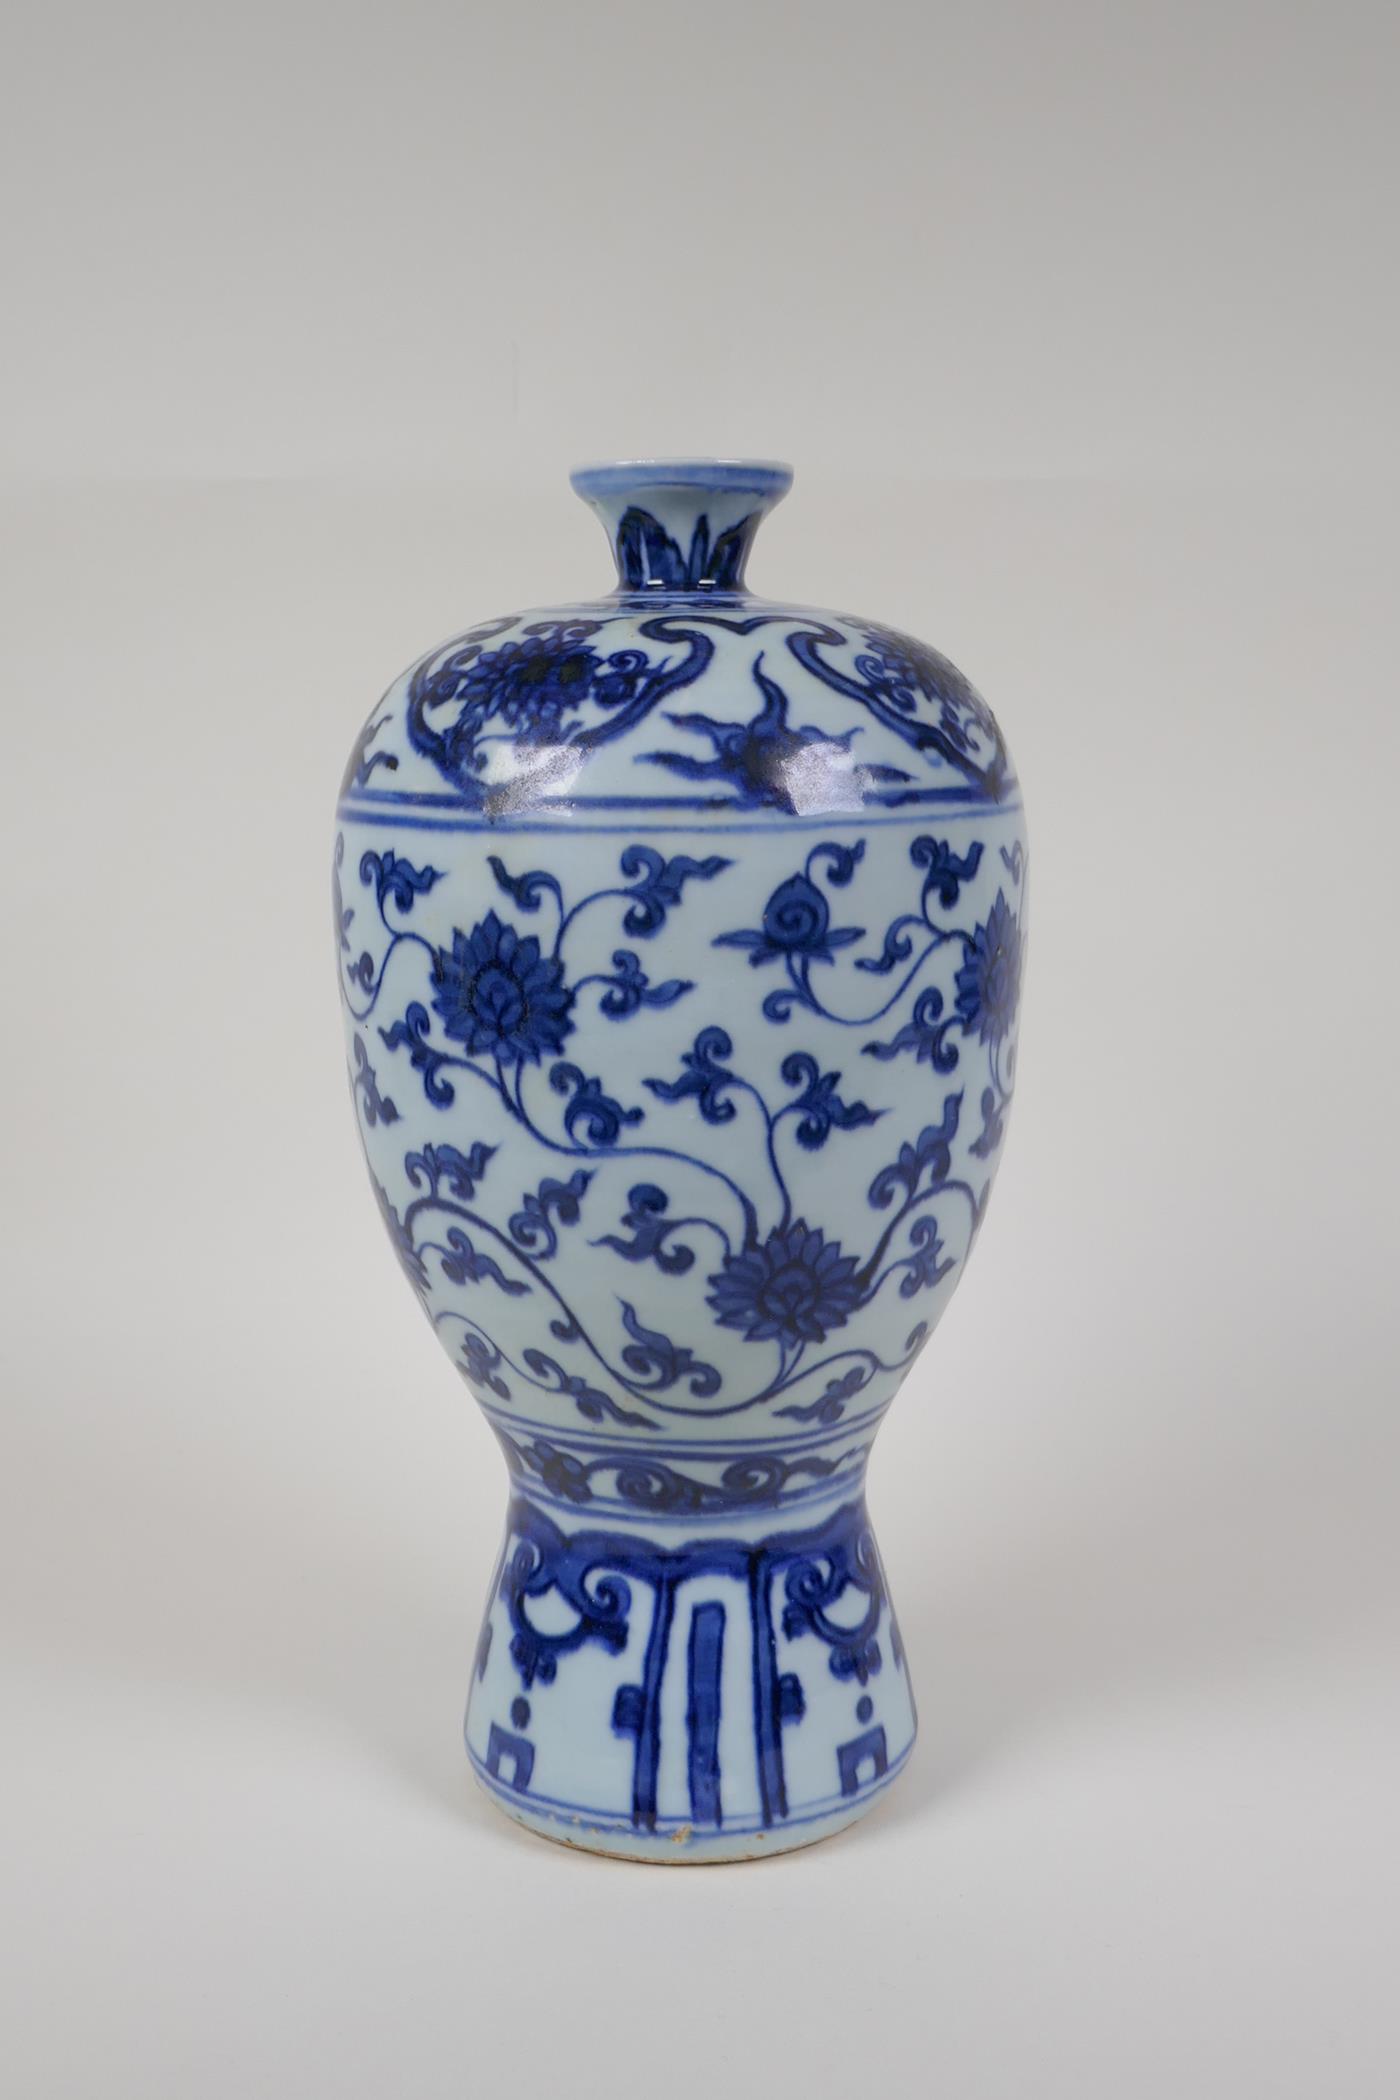 A Chinese ming style blue and white porcelain vase with scrolling lotus flower pattern, 11½" high - Image 3 of 8